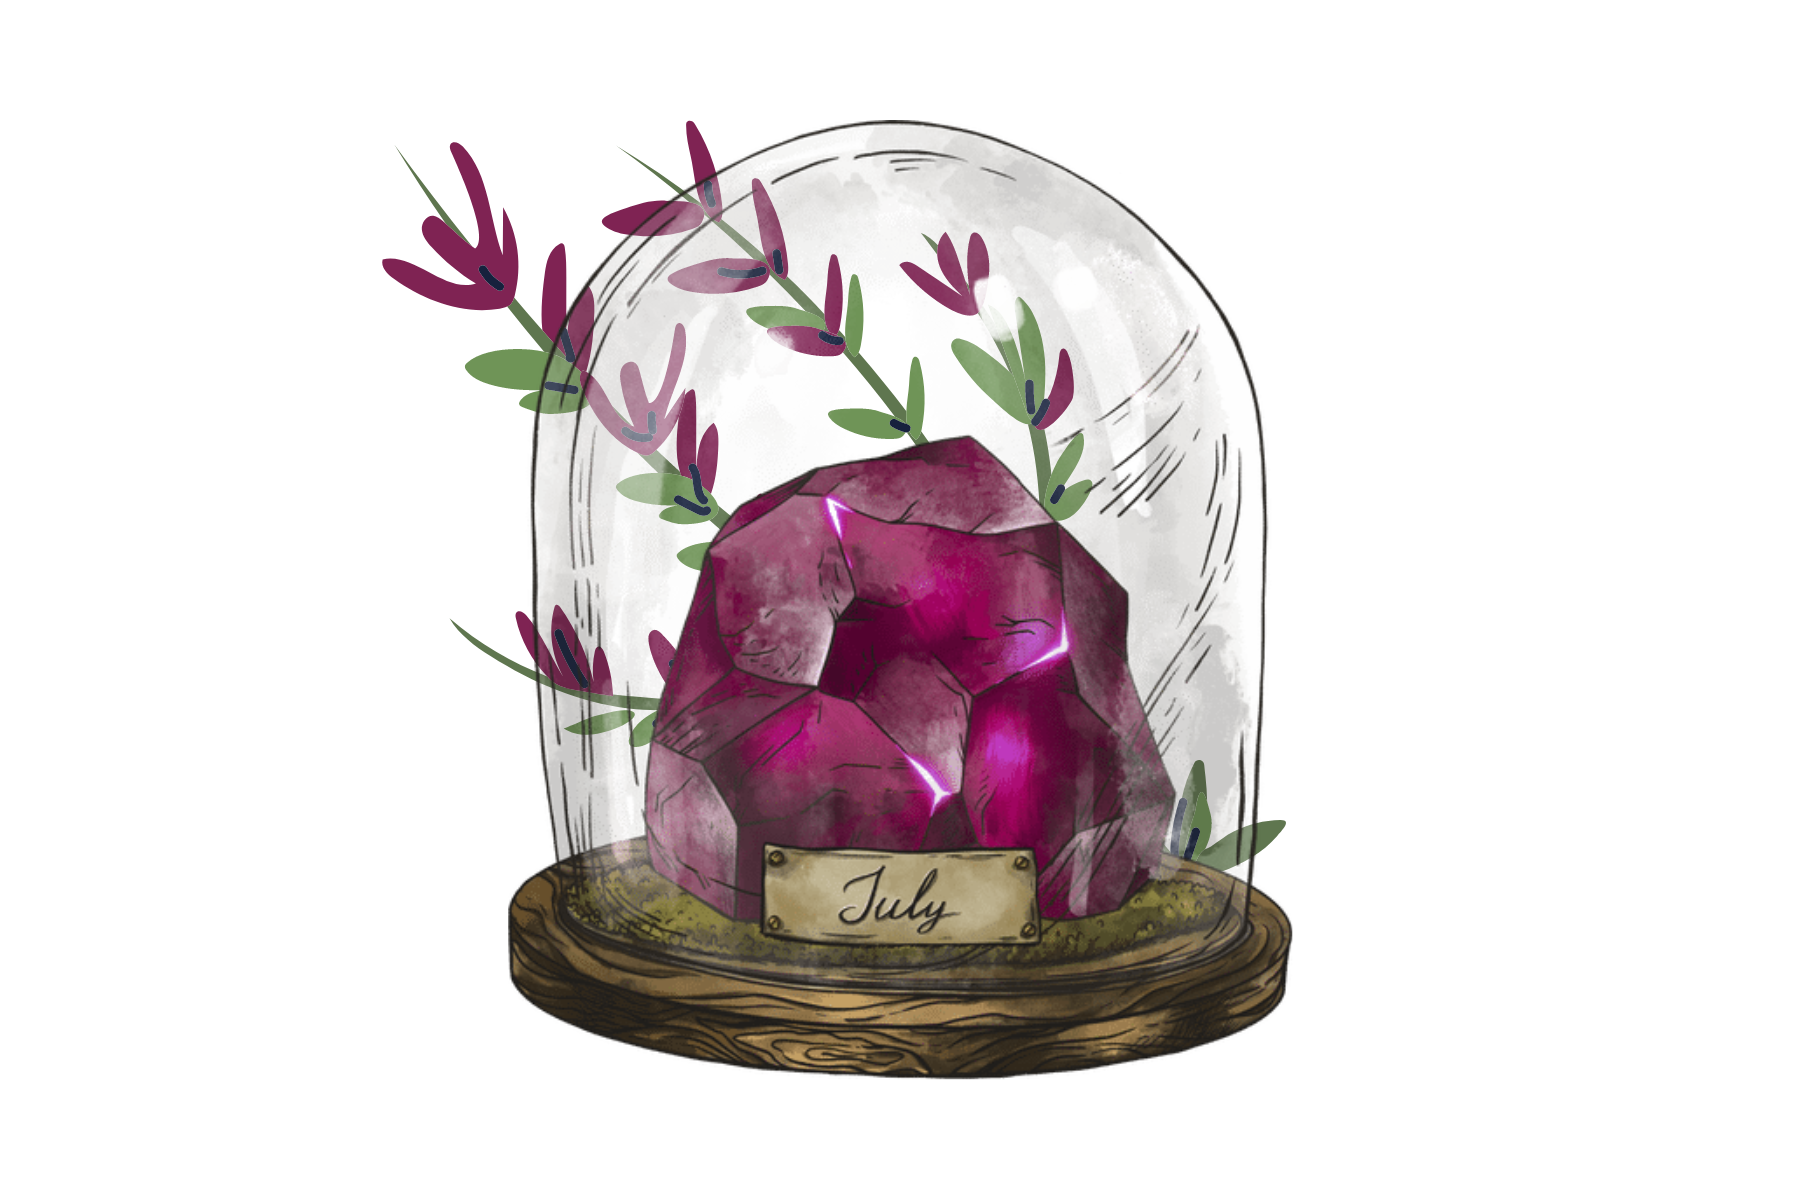 Ruby in a glass jar with leaves on the outside